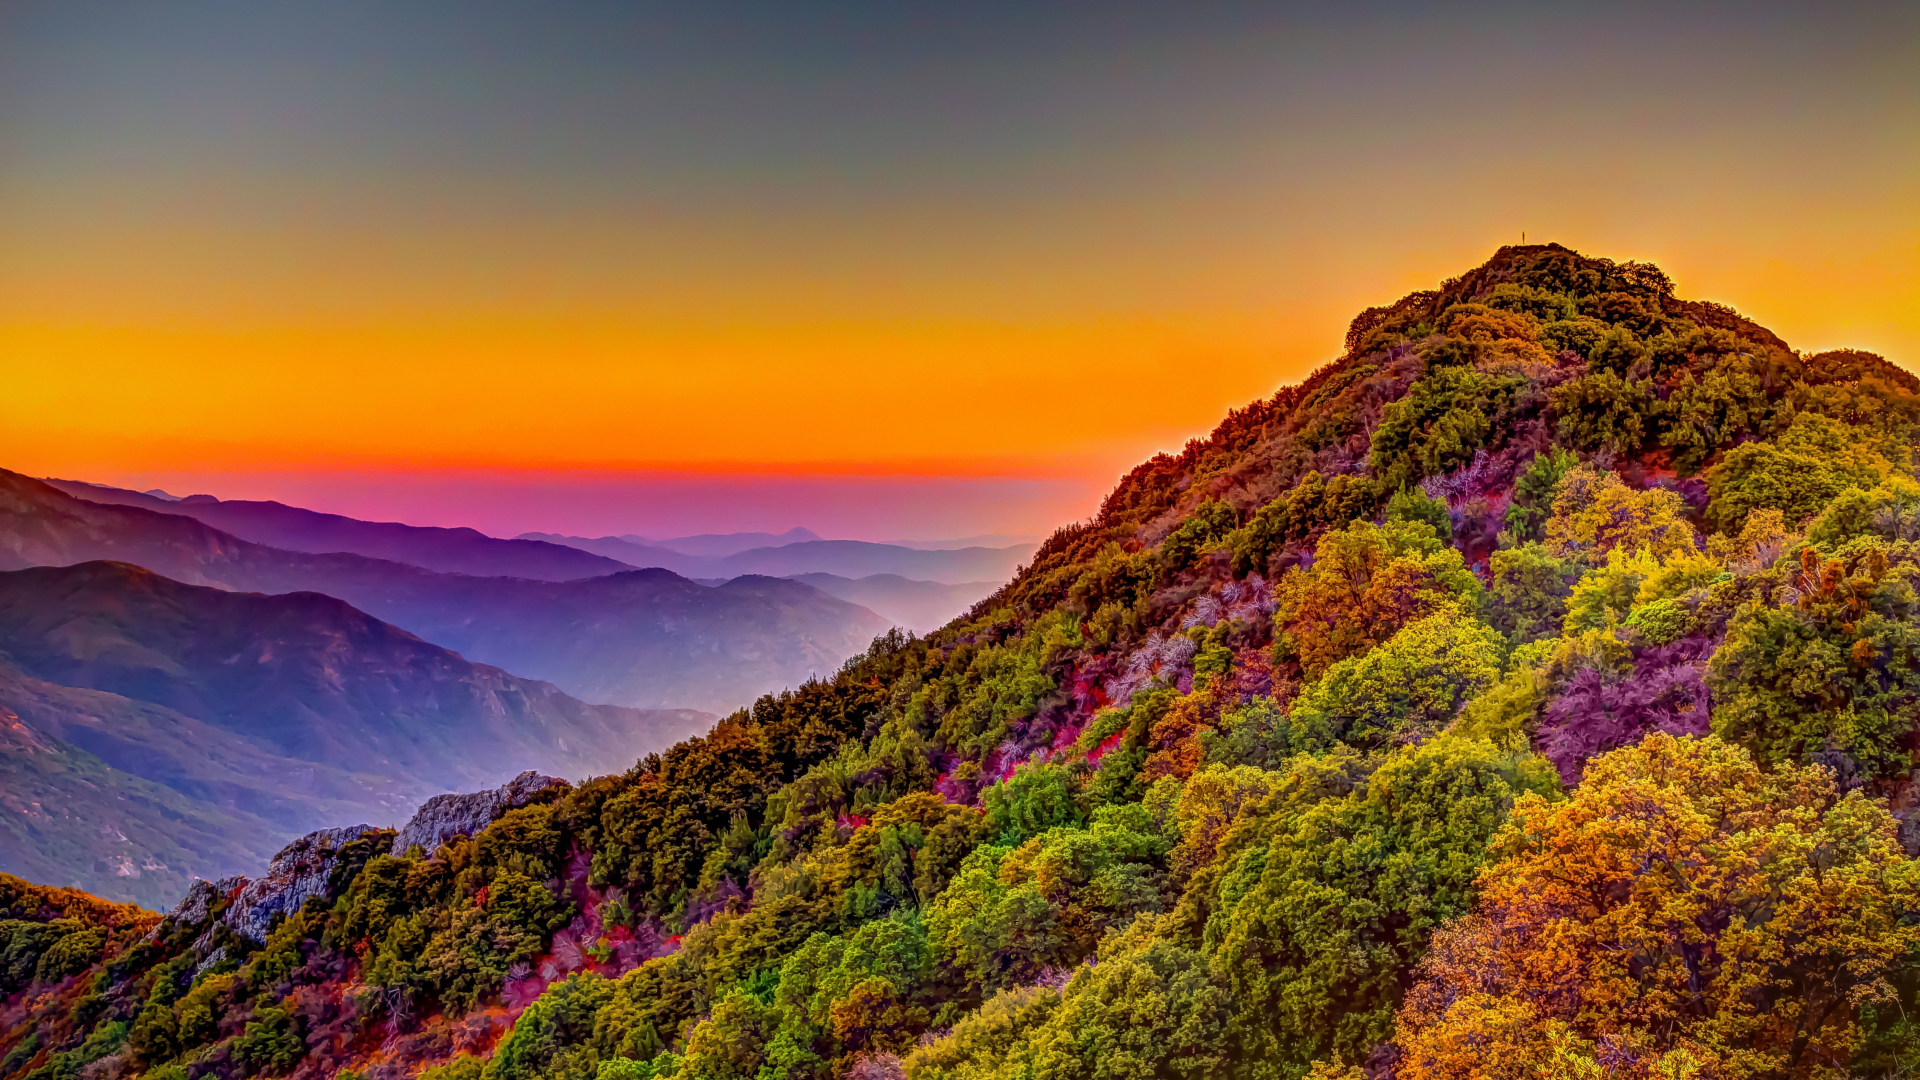 Download wallpaper 1920x1080 sequoia national park, sunset, hill, forest,  horizon, nature, full hd, hdtv, fhd, 1080p wallpaper, 1920x1080 hd  background, 16440